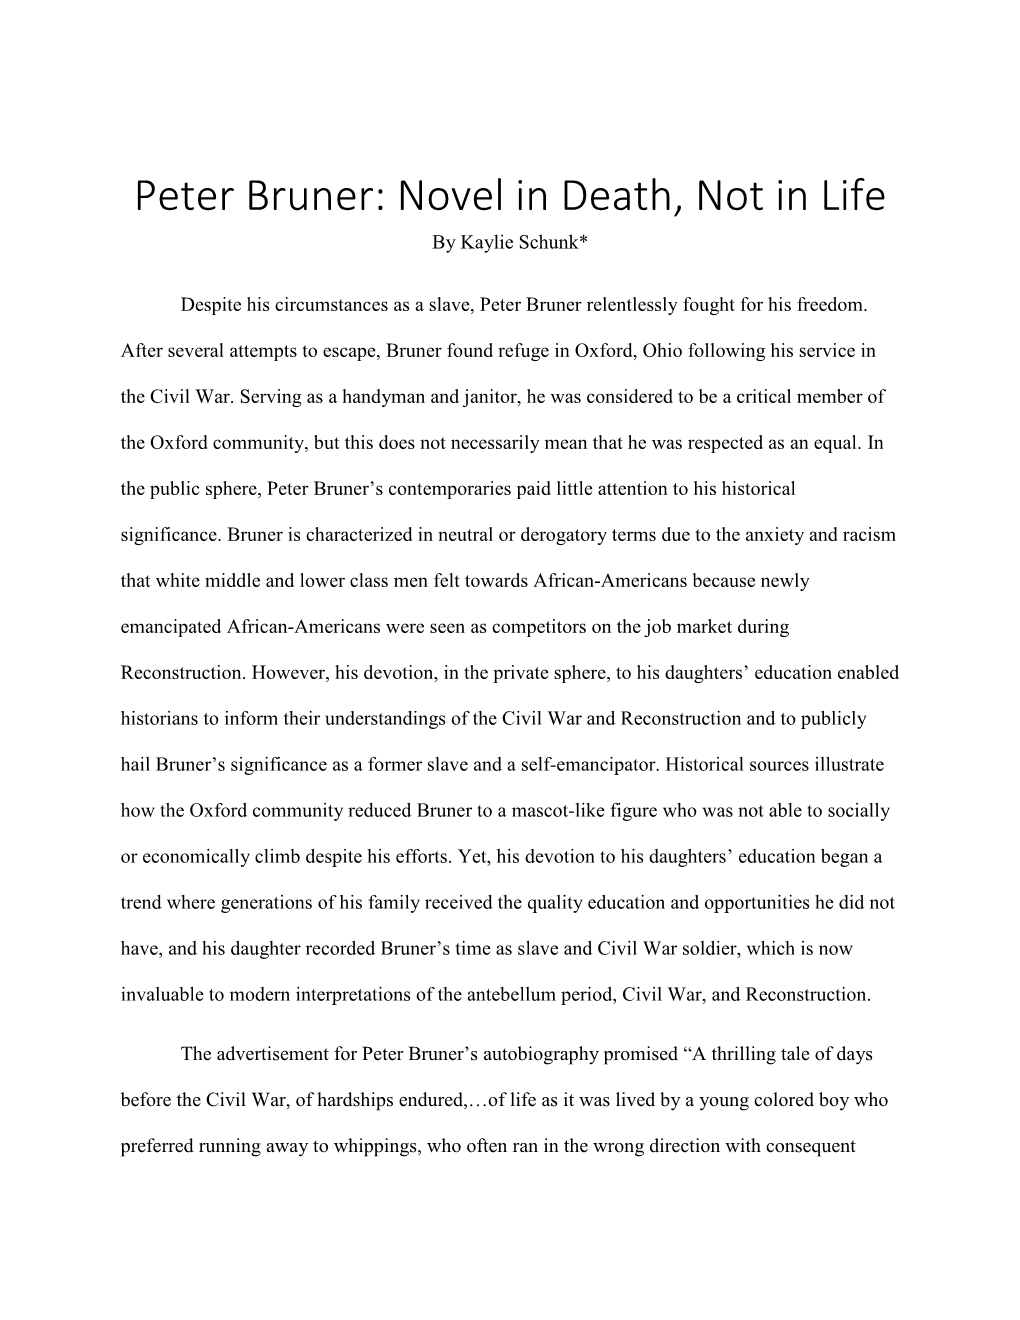 Peter Bruner: Novel in Death, Not in Life by Kaylie Schunk*